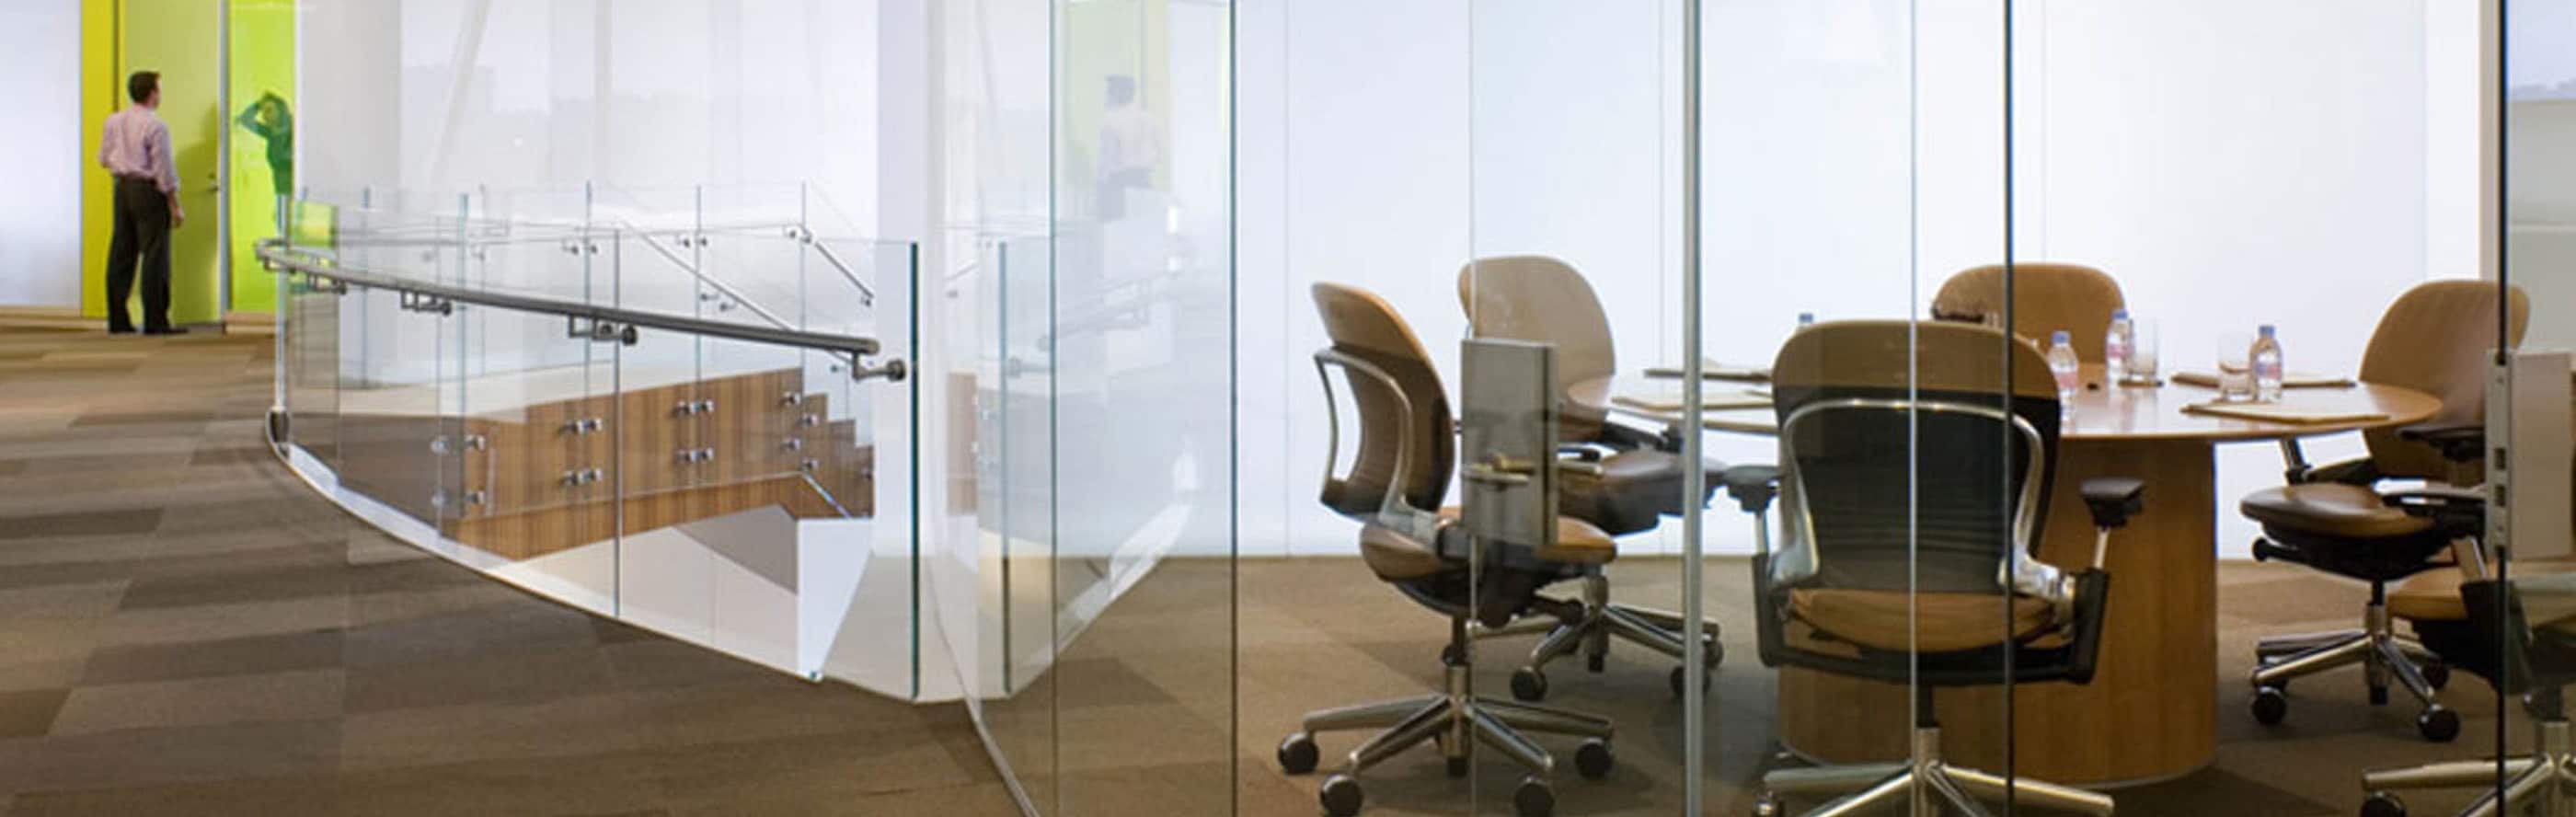 glass walled meeting room